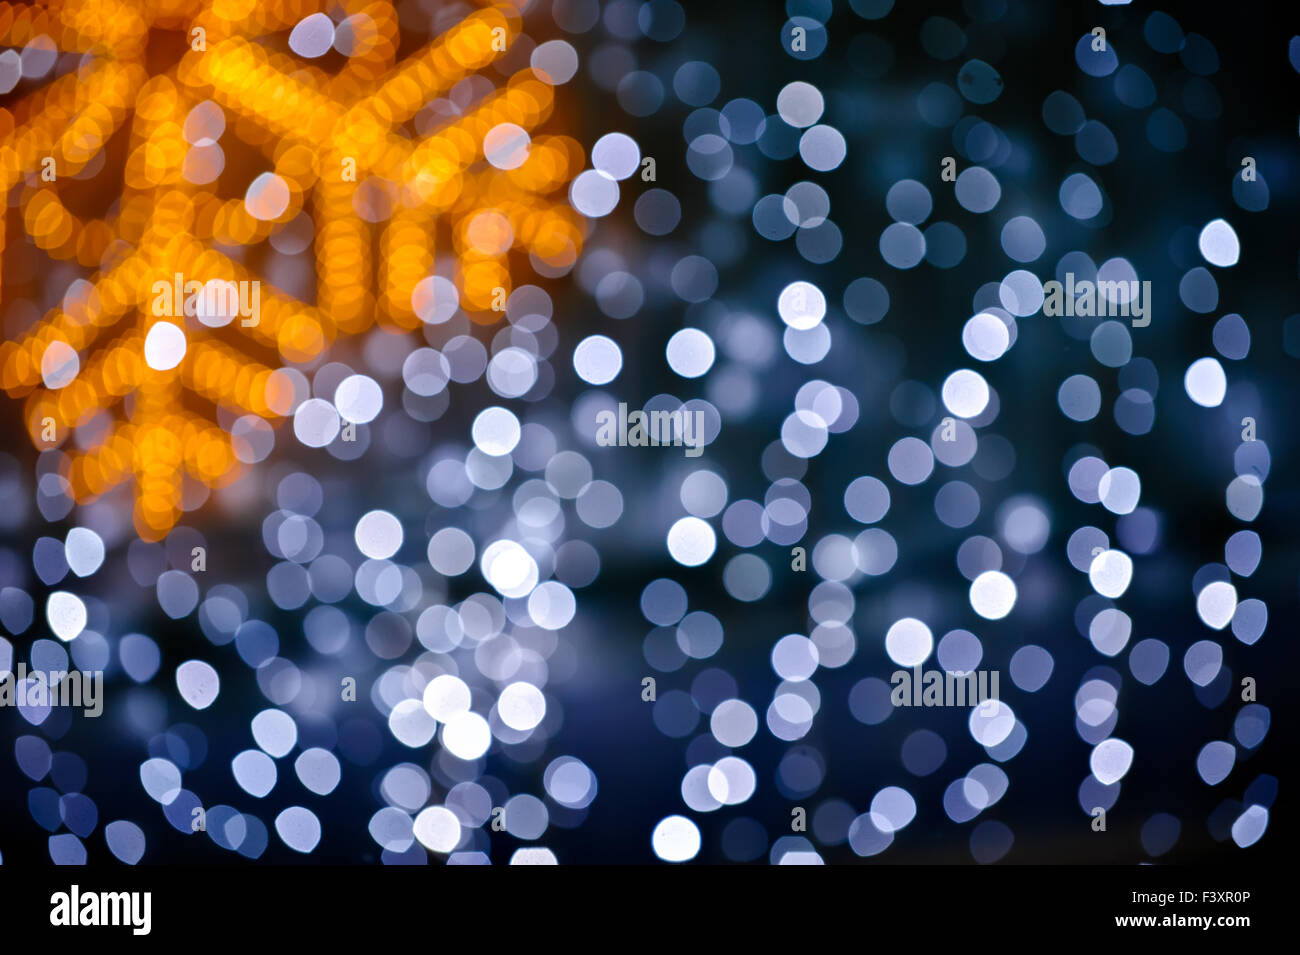 Blurred snowflake and lights background Stock Photo